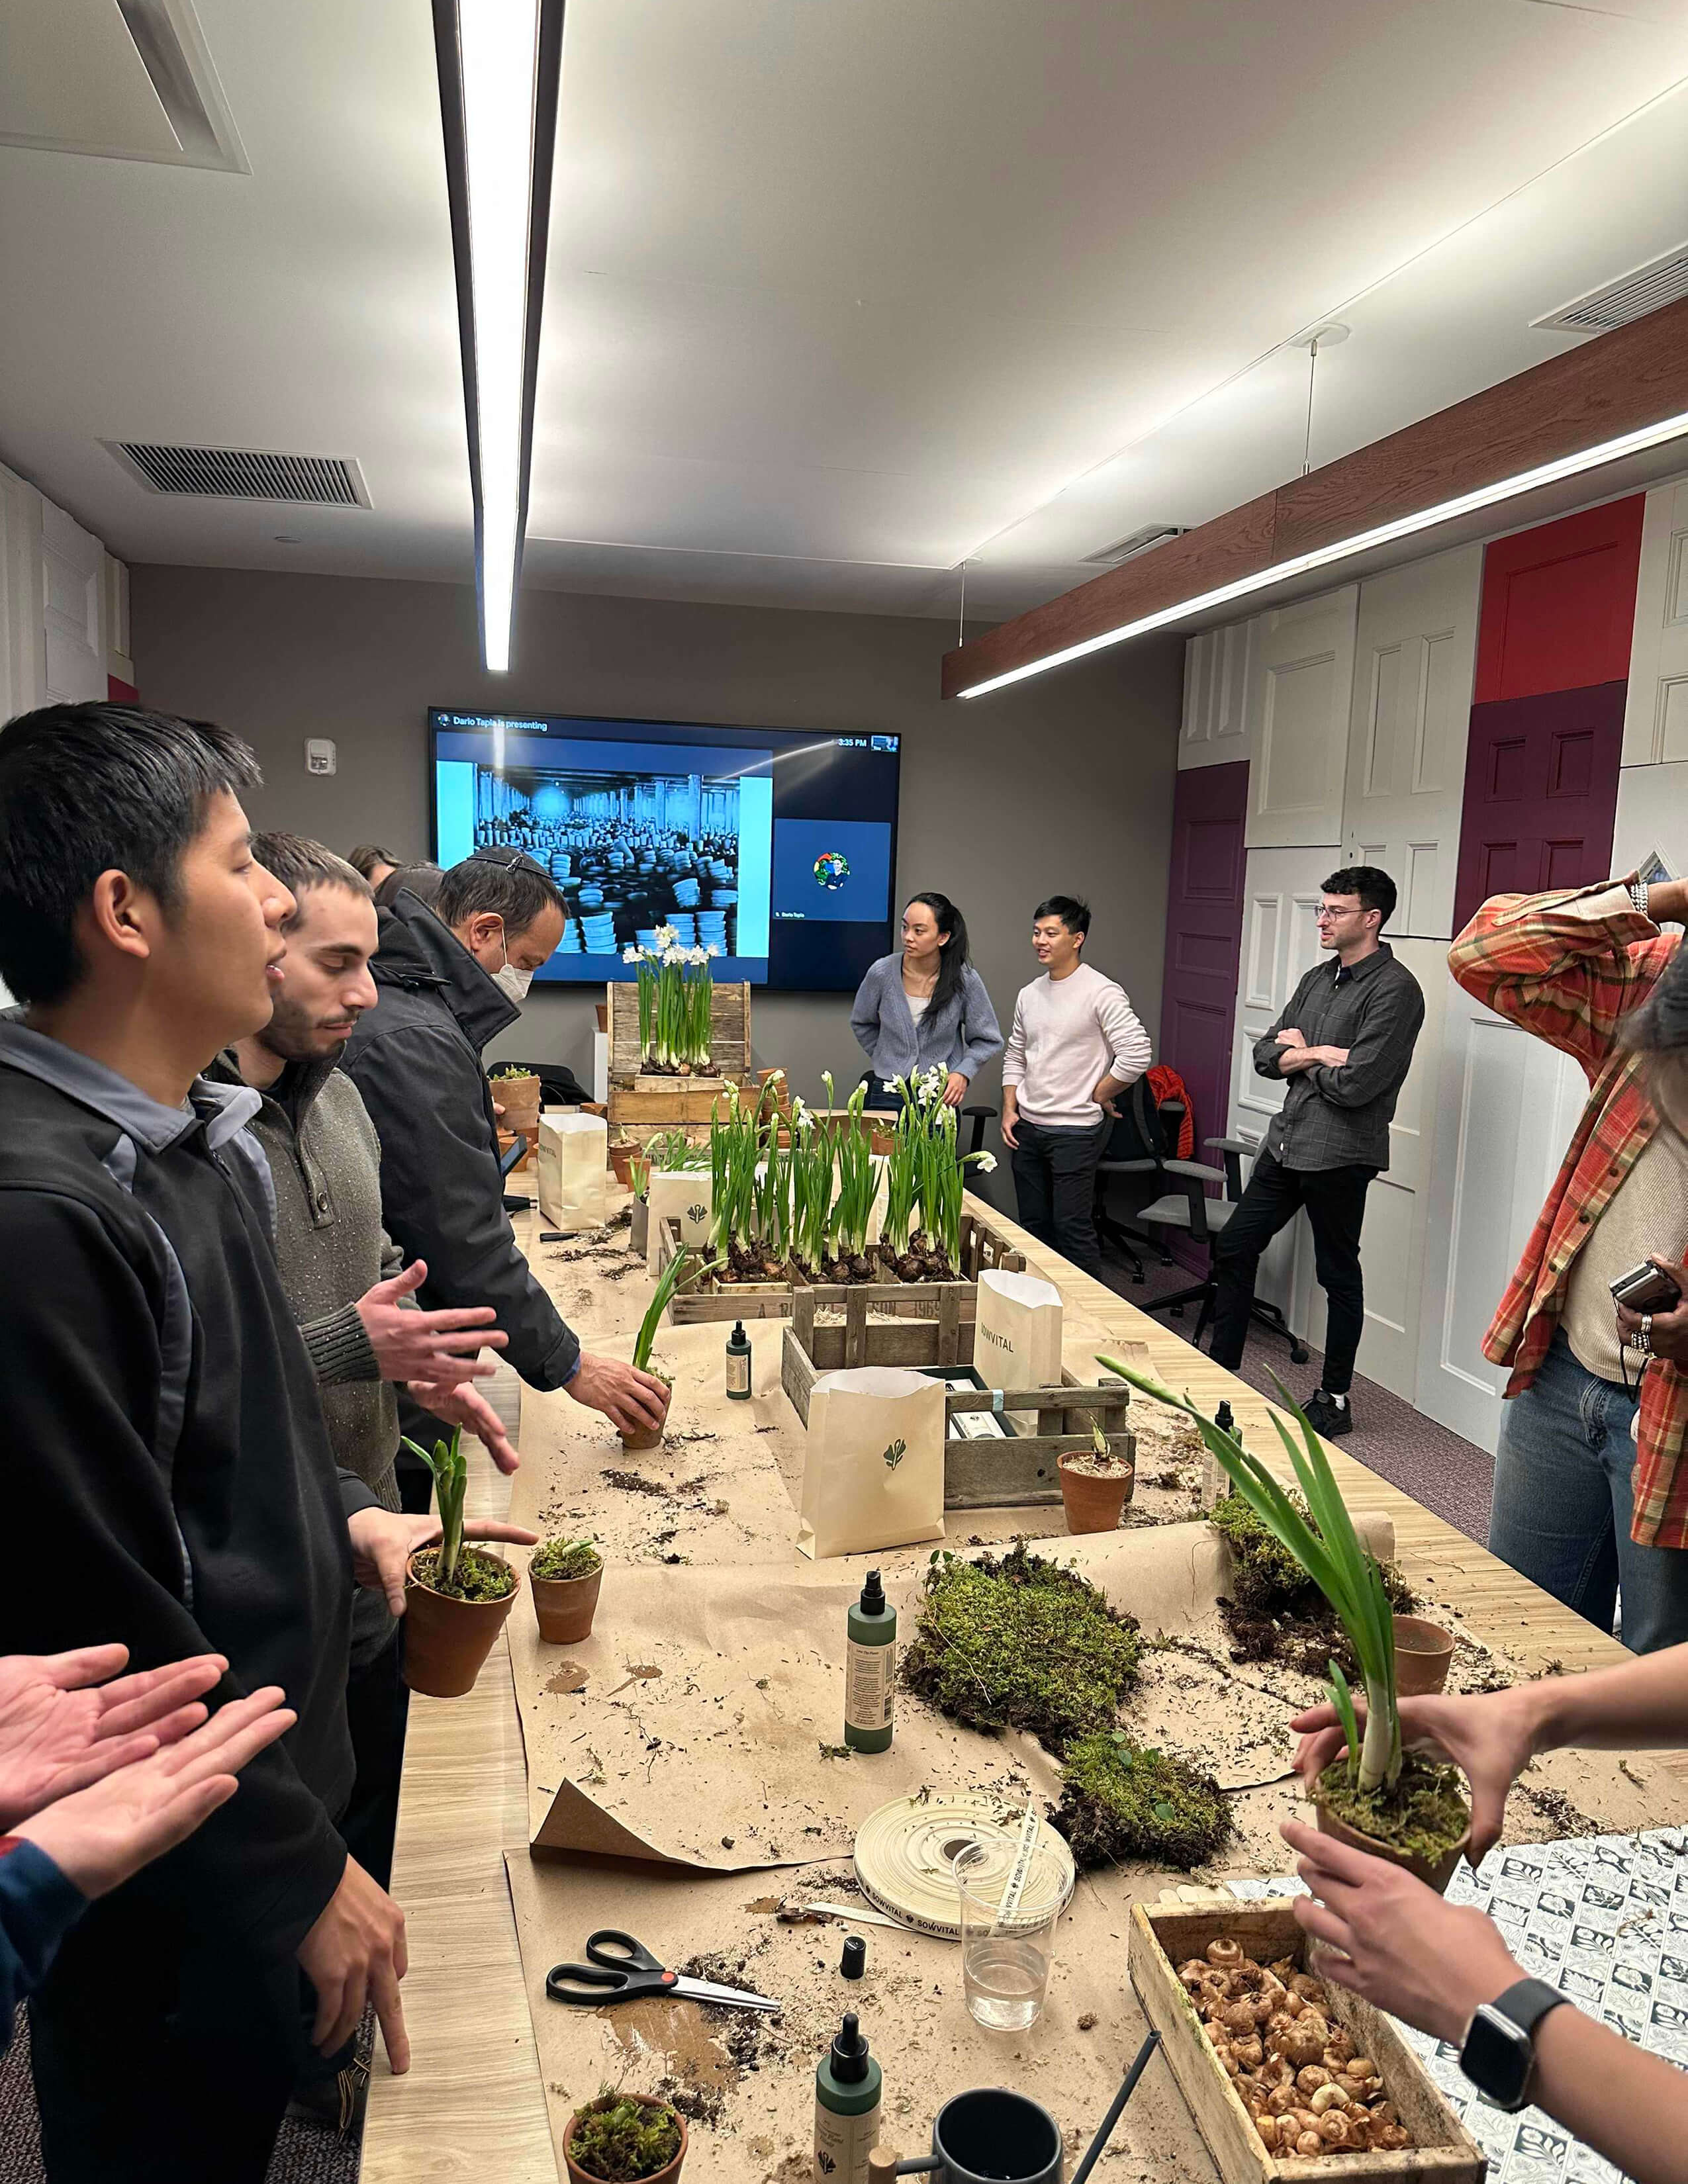 A group of people standing around the table to participate in plants growing workshop in the meeting room. Plenty of plants and materials on the table.